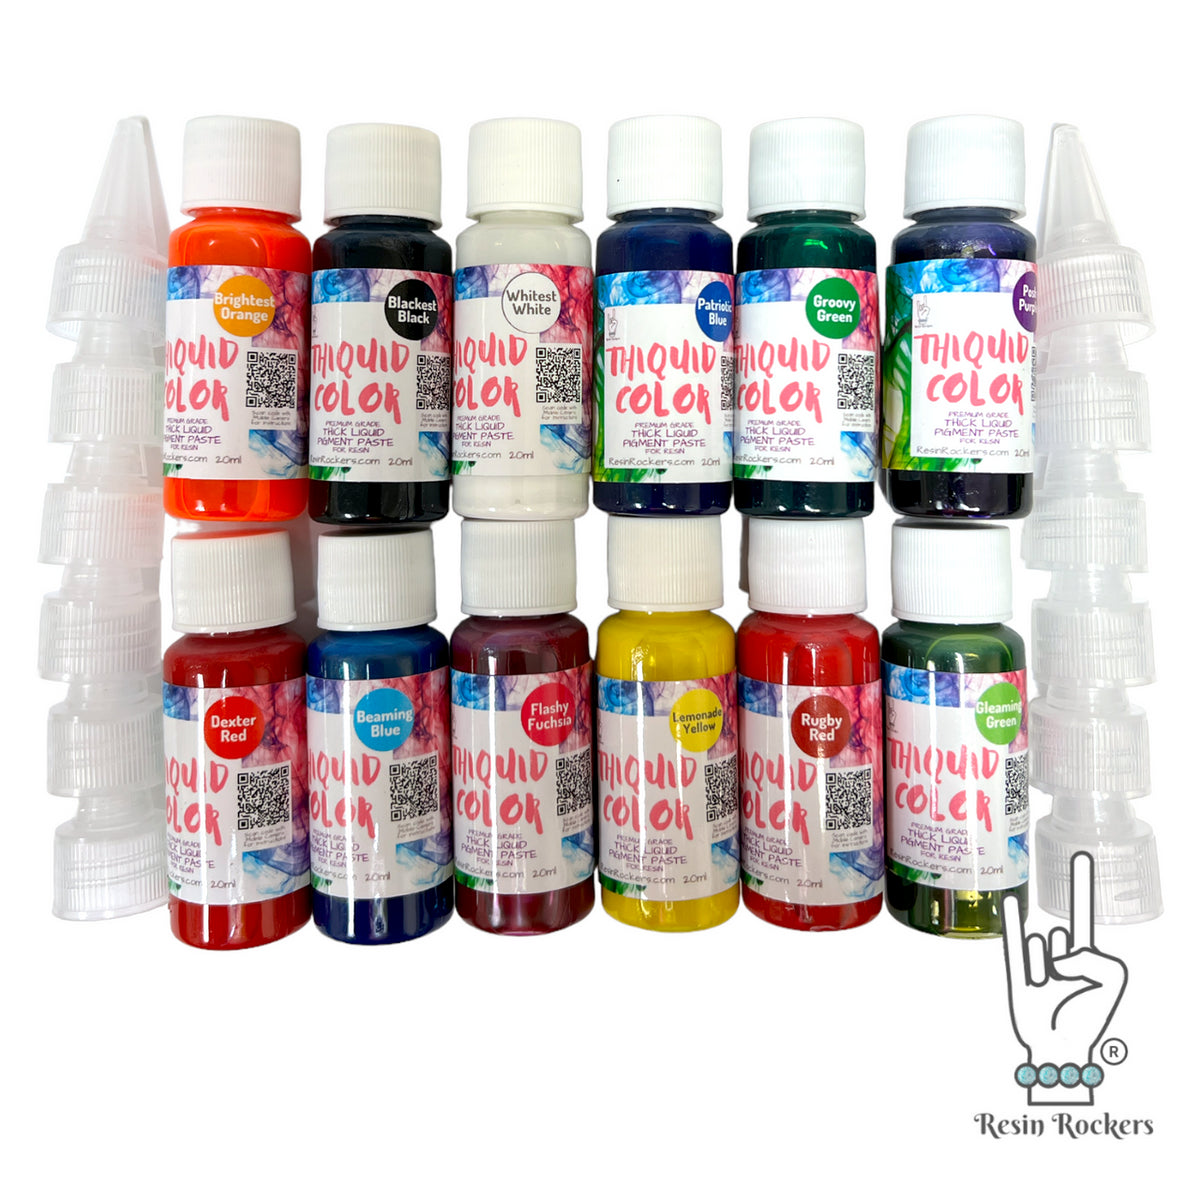 Thiquid Full Kit 20 ml Bottles Liquid Concentrated Pigment for Epoxy Resin Art